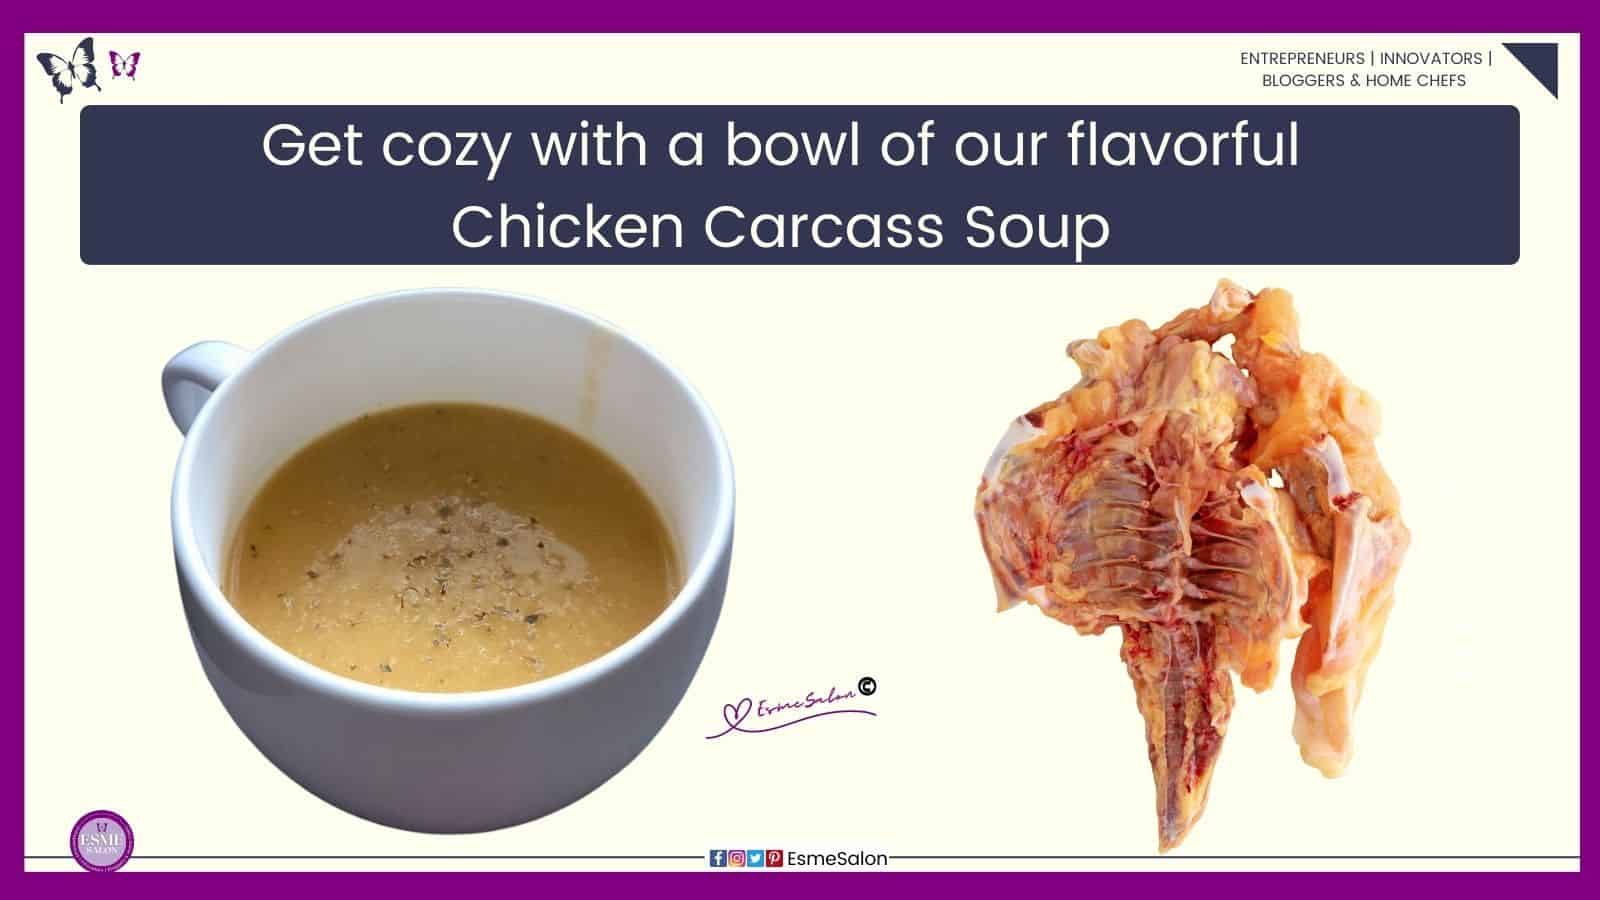 an image of a light blue/grayish soup bowl filled with Chicken Carcass Soup